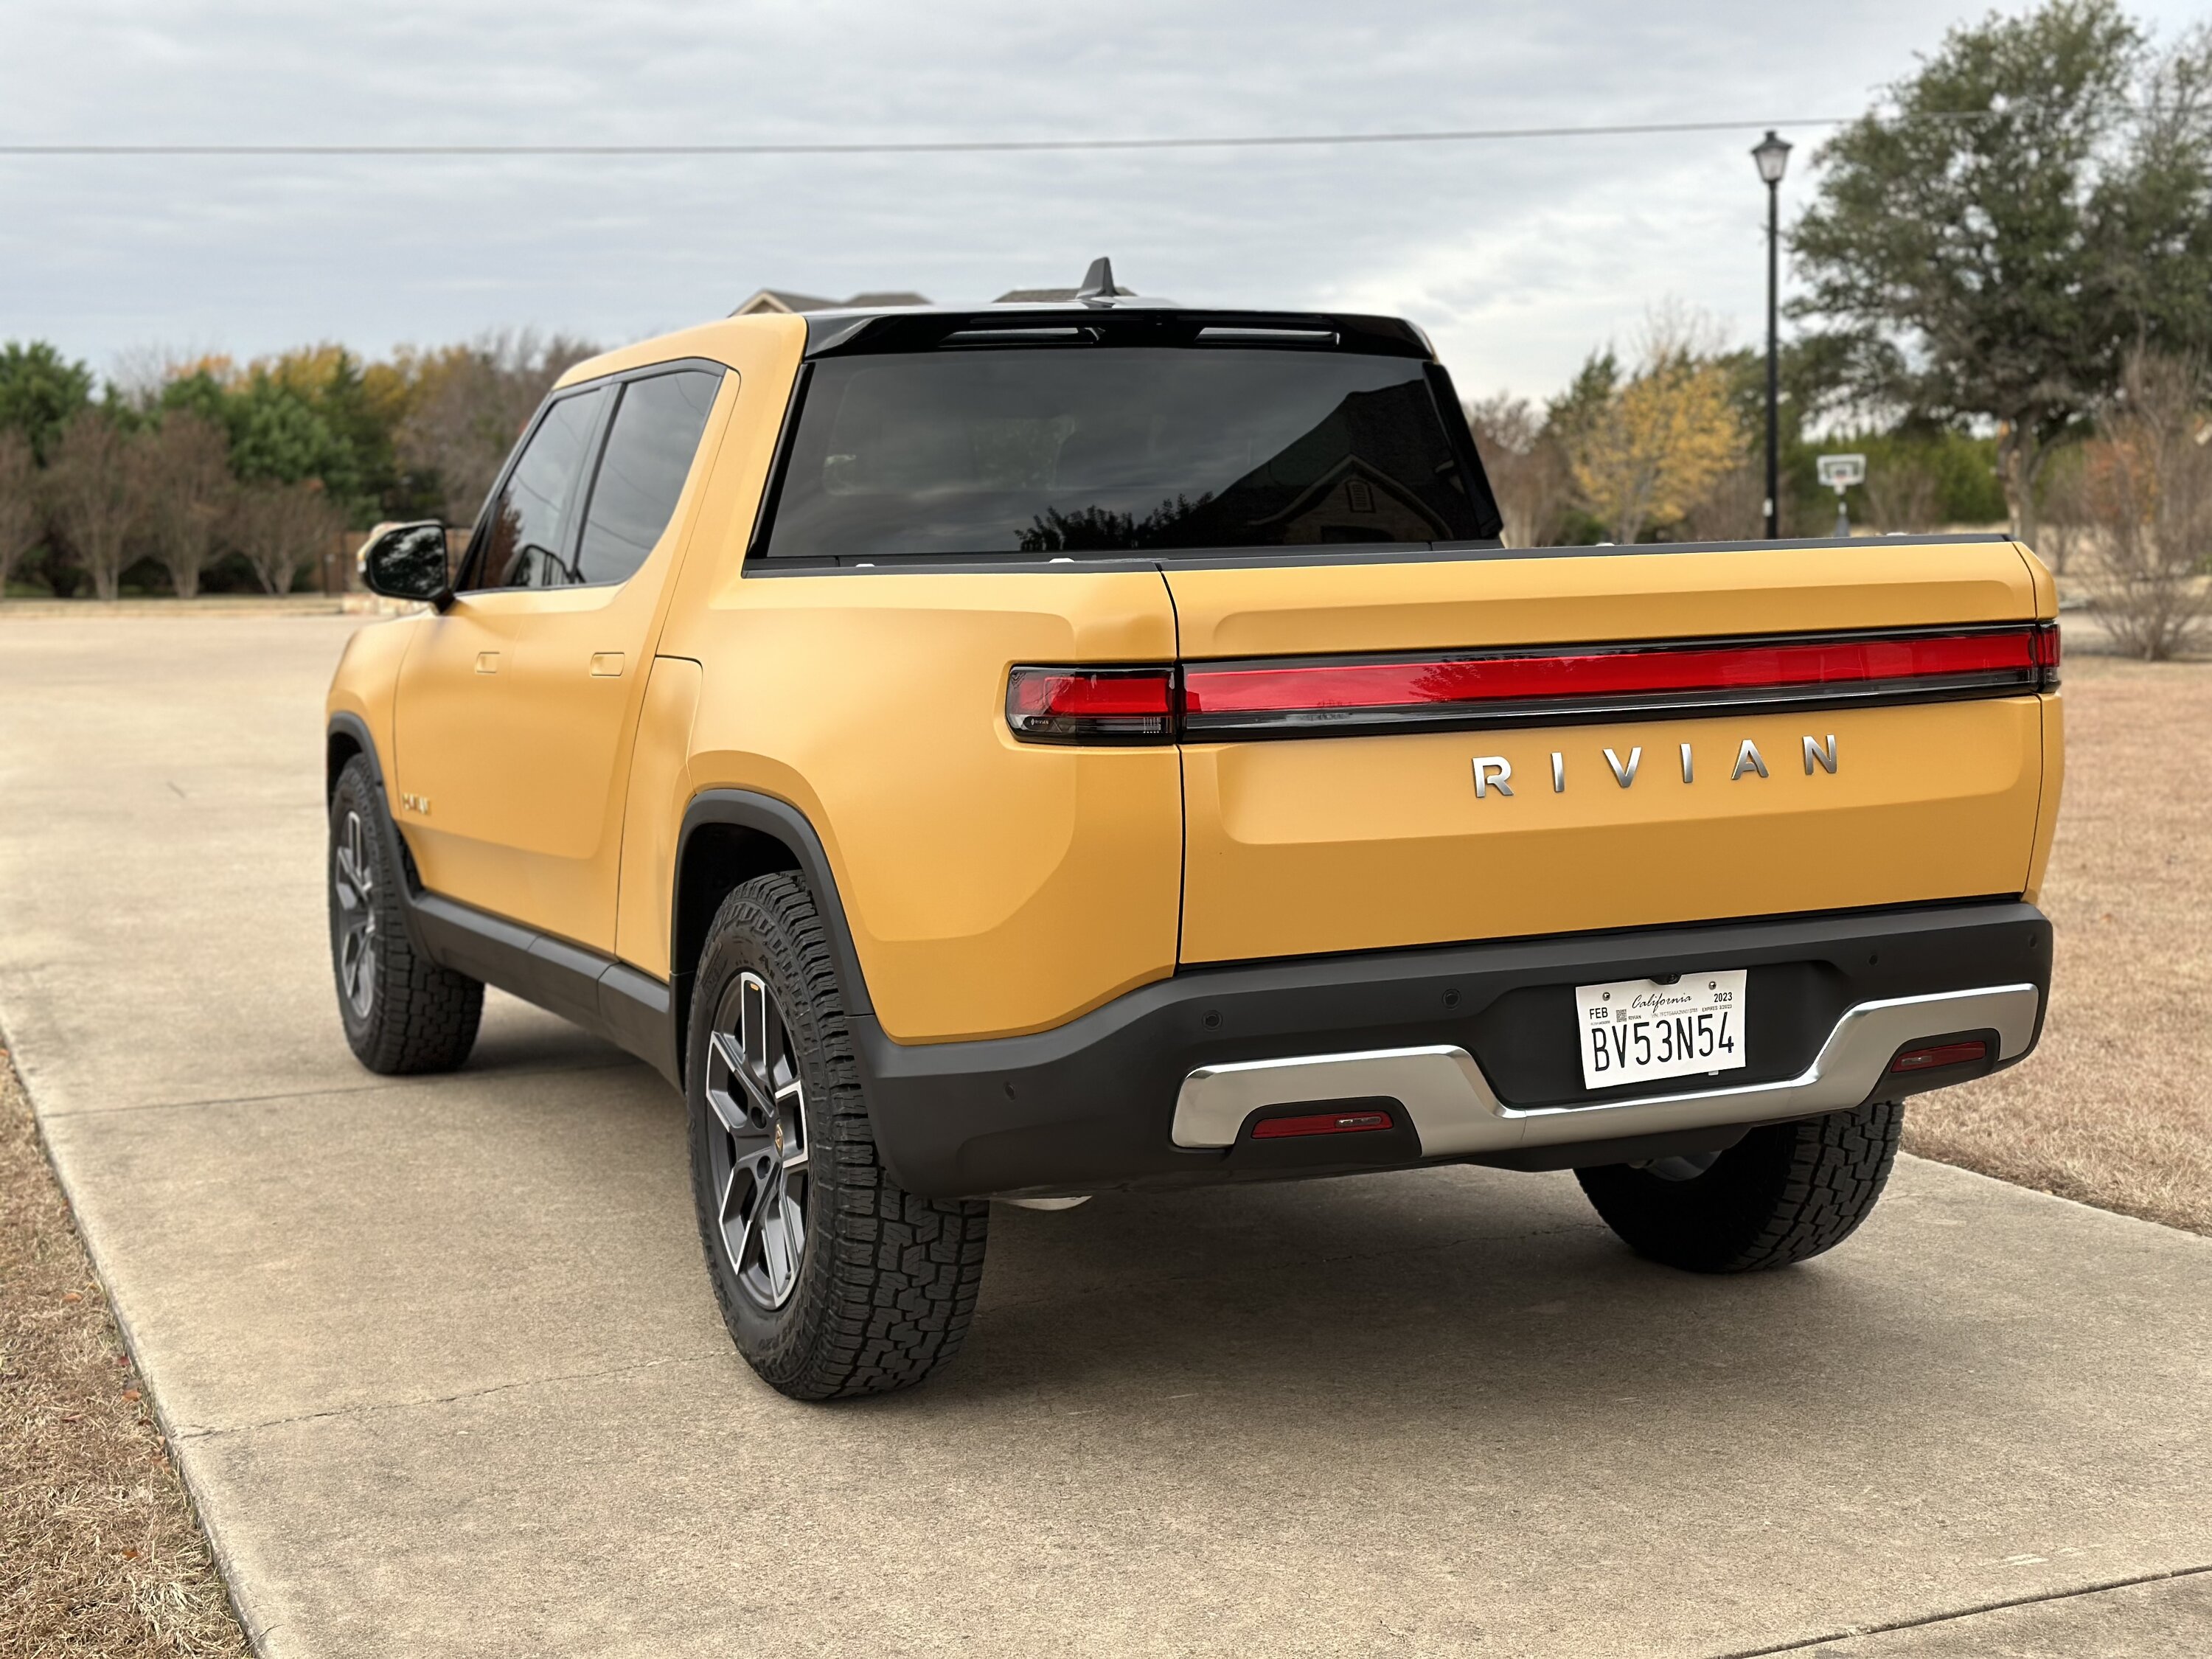 Rivian R1T R1S Stealthy Banana 🍌 -- Compass Yellow R1T w/ Tint and Stealth PPF Wrap 38EE7520-B5D5-4118-9B2C-8501494BB1F6